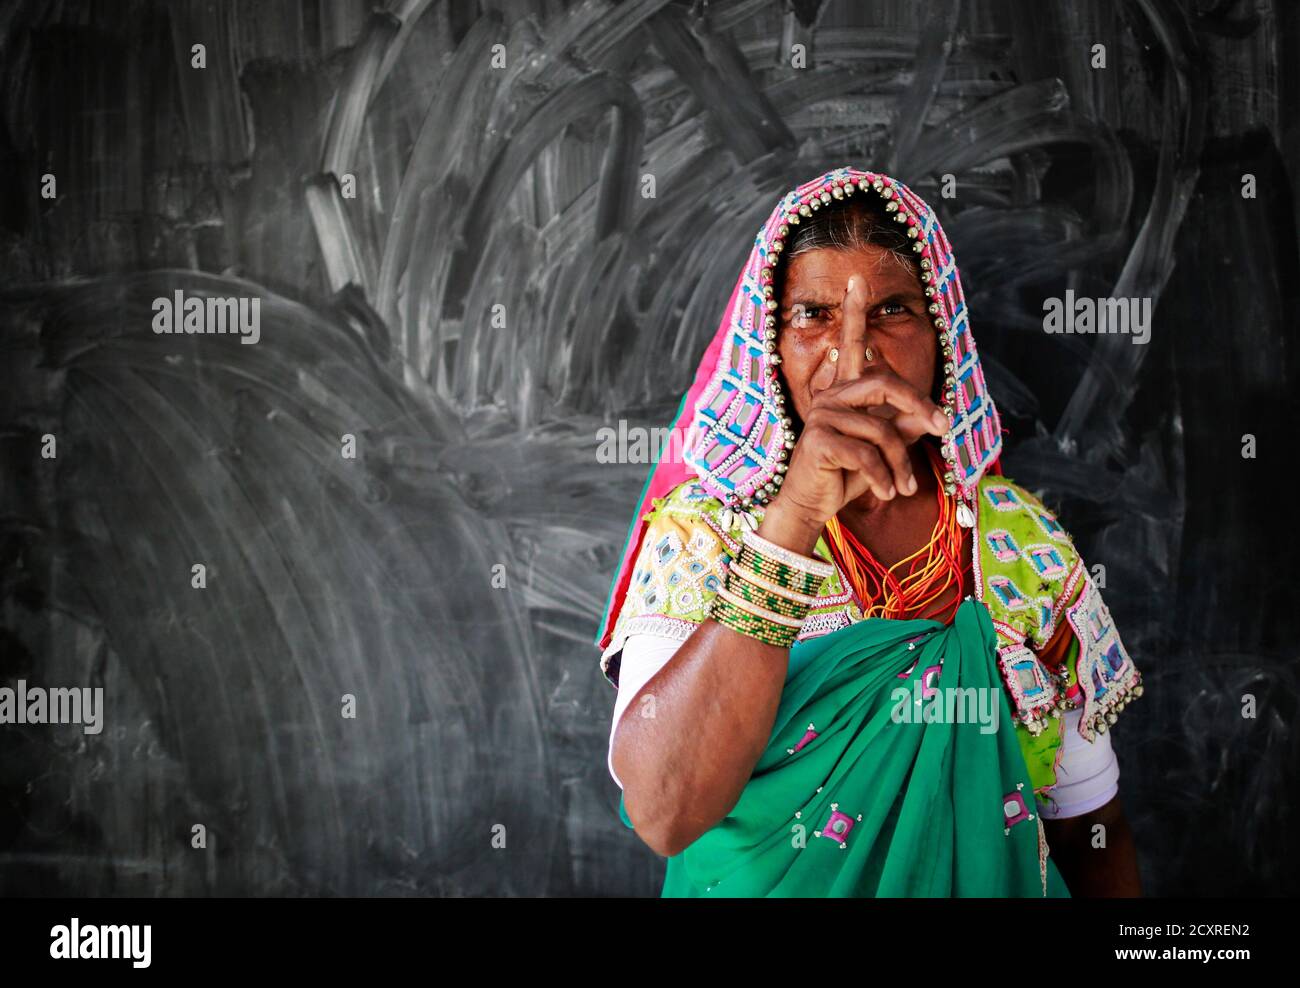 A tribal woman shows her ink-marked finger after voting at a polling centre during the seventh phase of India's general election, in Rangareddy district in the southern Indian state of Andhra Pradesh April 30, 2014. Around 815 million people have registered to vote in the world's biggest election - a number exceeding the population of Europe and a world record - and results of the mammoth exercise, which concludes on May 12, are due on May 16. REUTERS/Danish Siddiqui (INDIA - Tags: ELECTIONS POLITICS TPX IMAGES OF THE DAY) Stock Photo